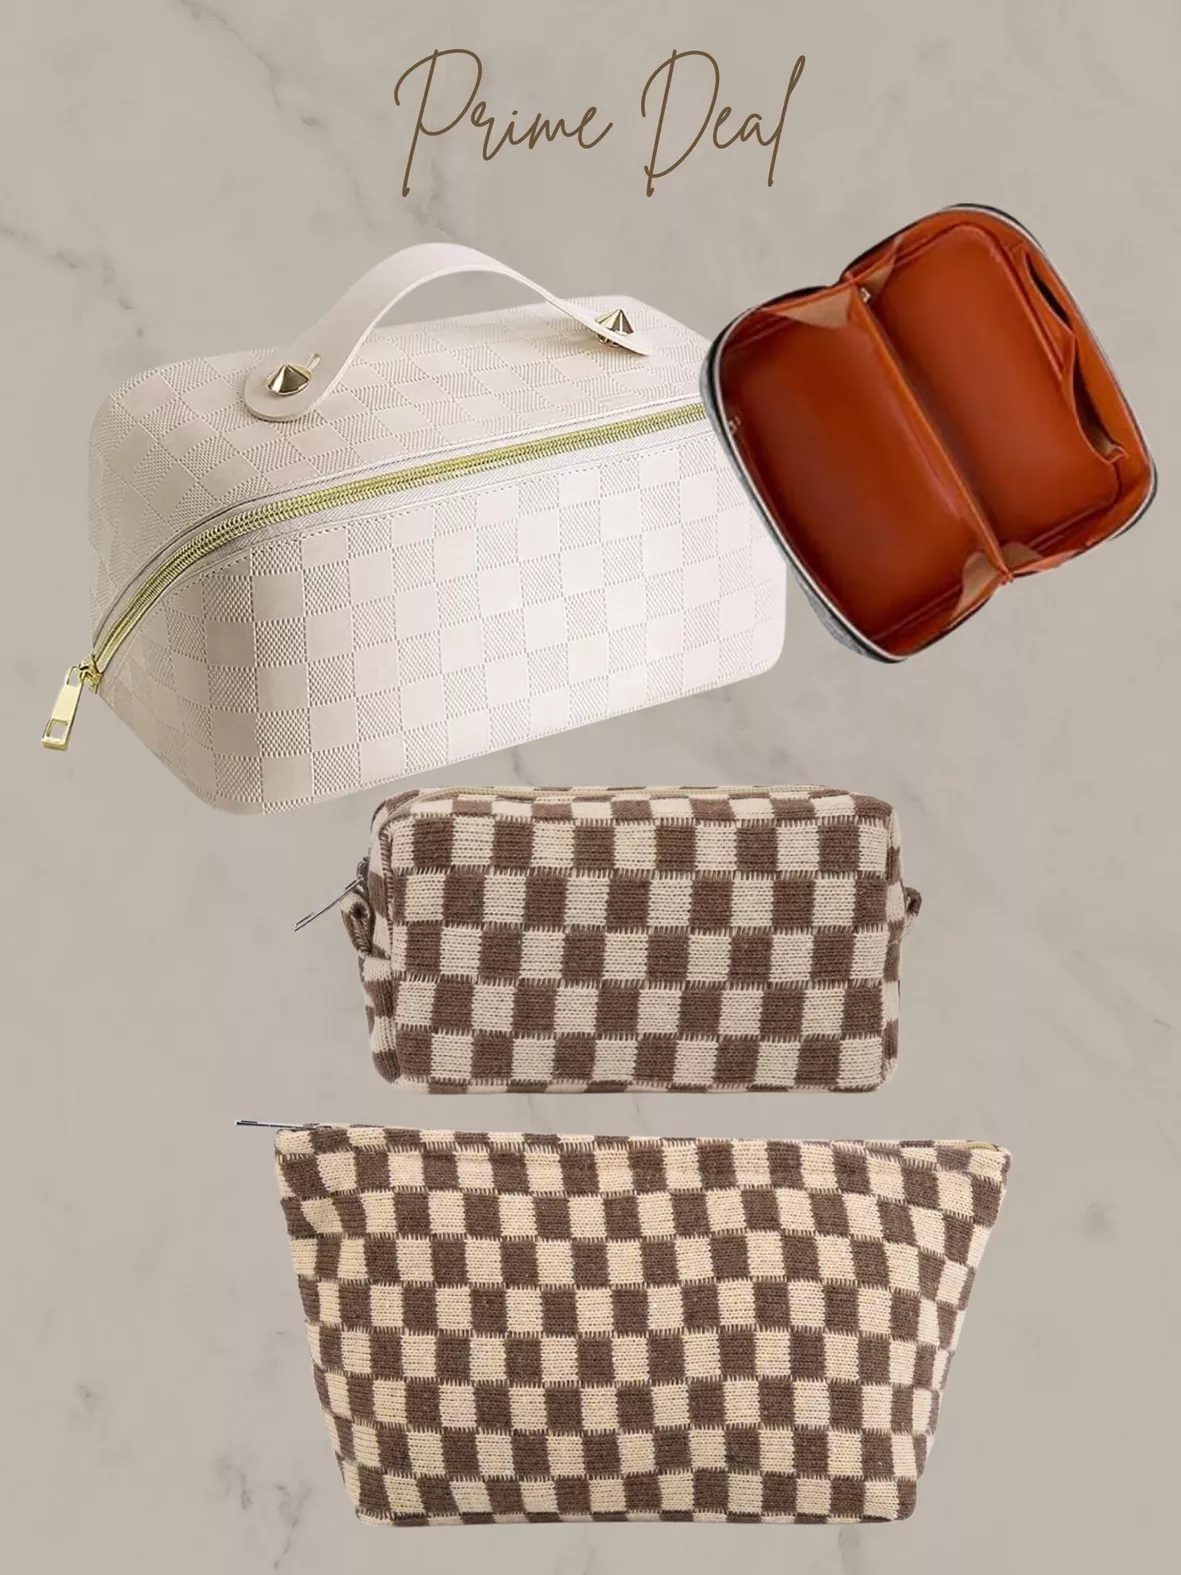 Large Capacity Travel Cosmetic Bag In Checker Style